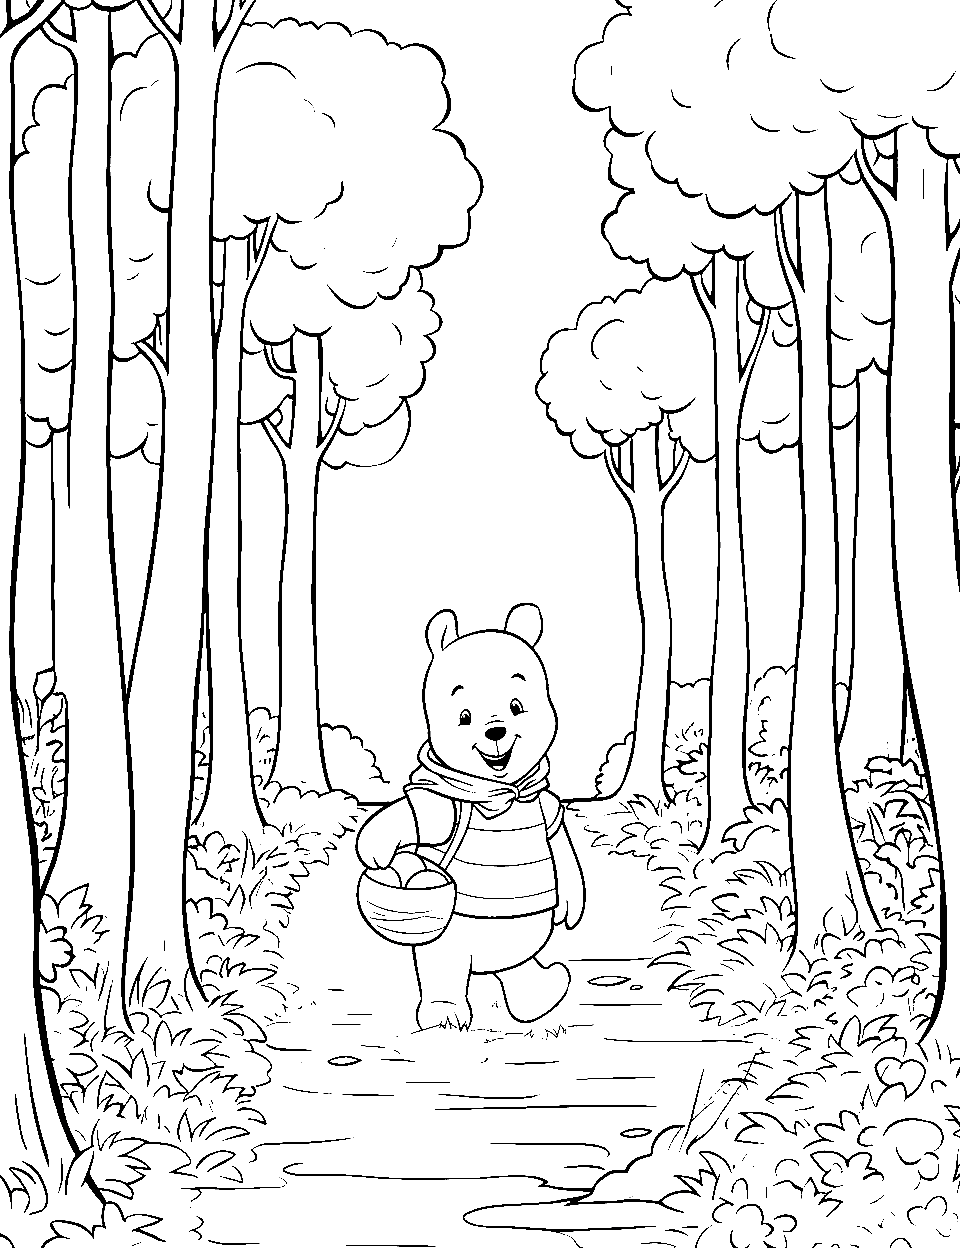 Enchanting Forest Walk Coloring Page - Pooh Bear walking on a path through an enchanting forest filled with tall trees.